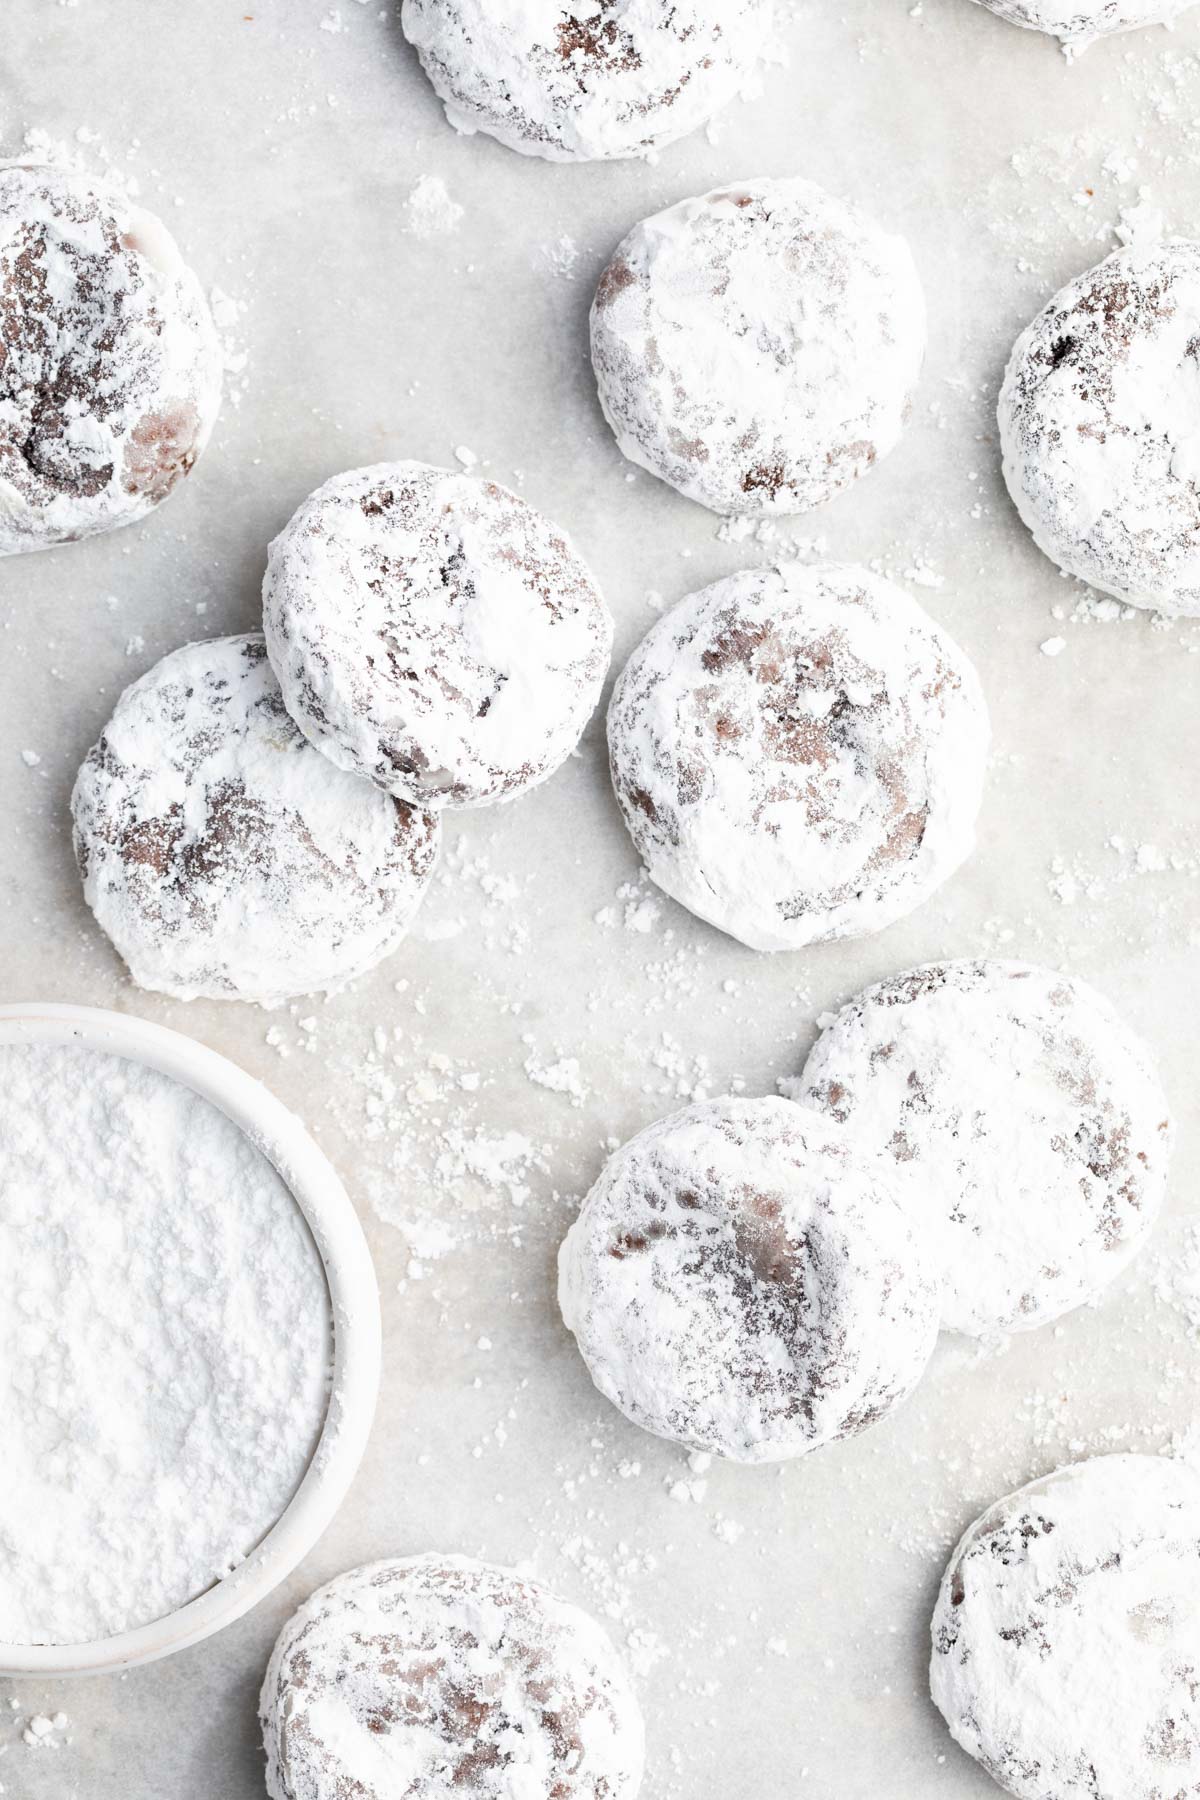 Aerial view of Chocolate Snowballs with powdered sugar